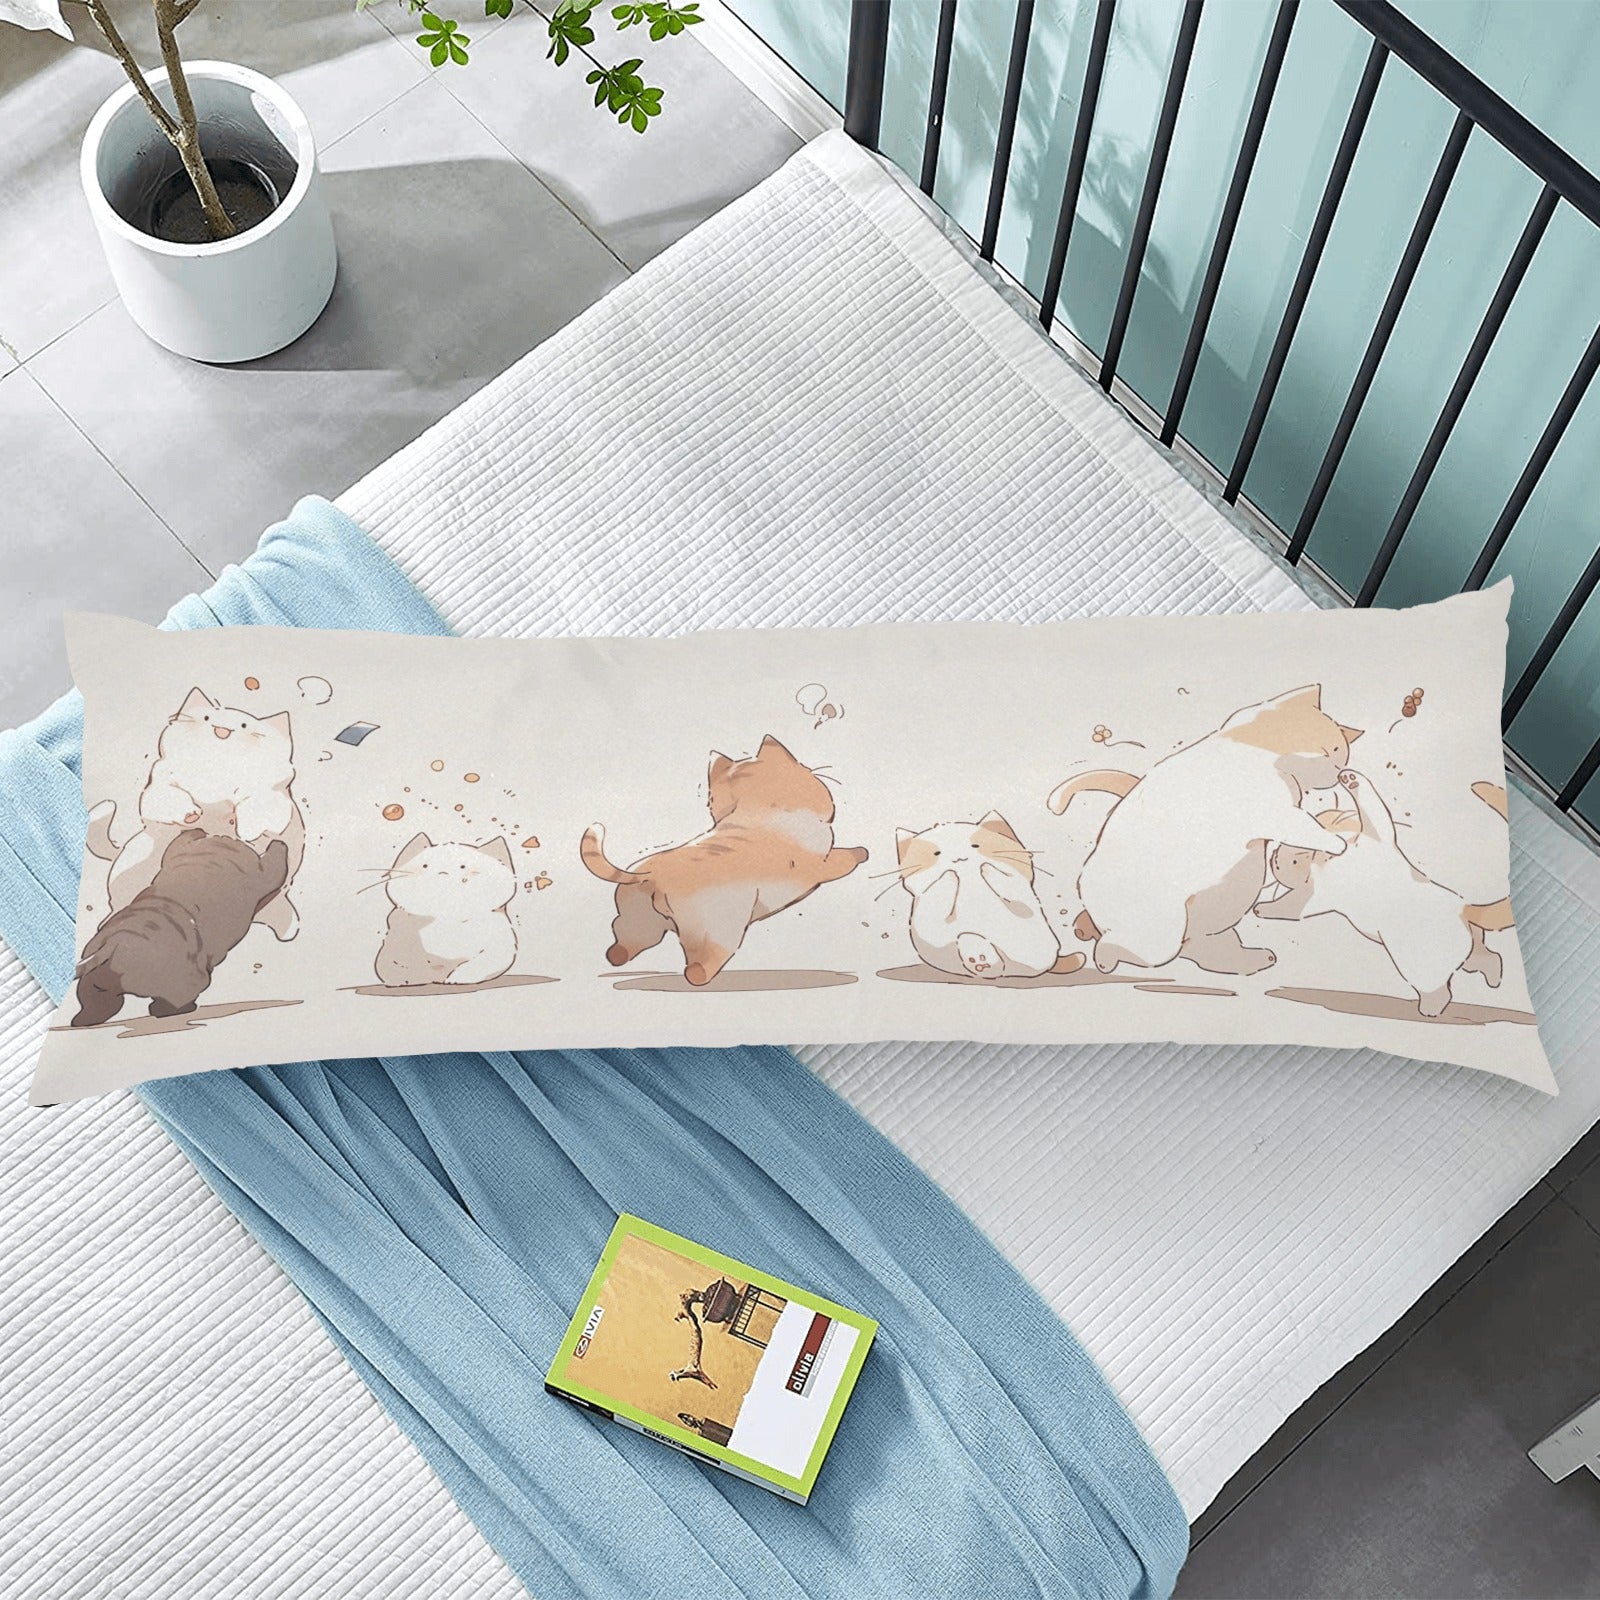 Cats Body Pillow Case, Cute Anime Kawaii Kittens Long Full Large Bed Accent Print Throw Decor Decorative Cover 20x54 Satin Starcove Fashion